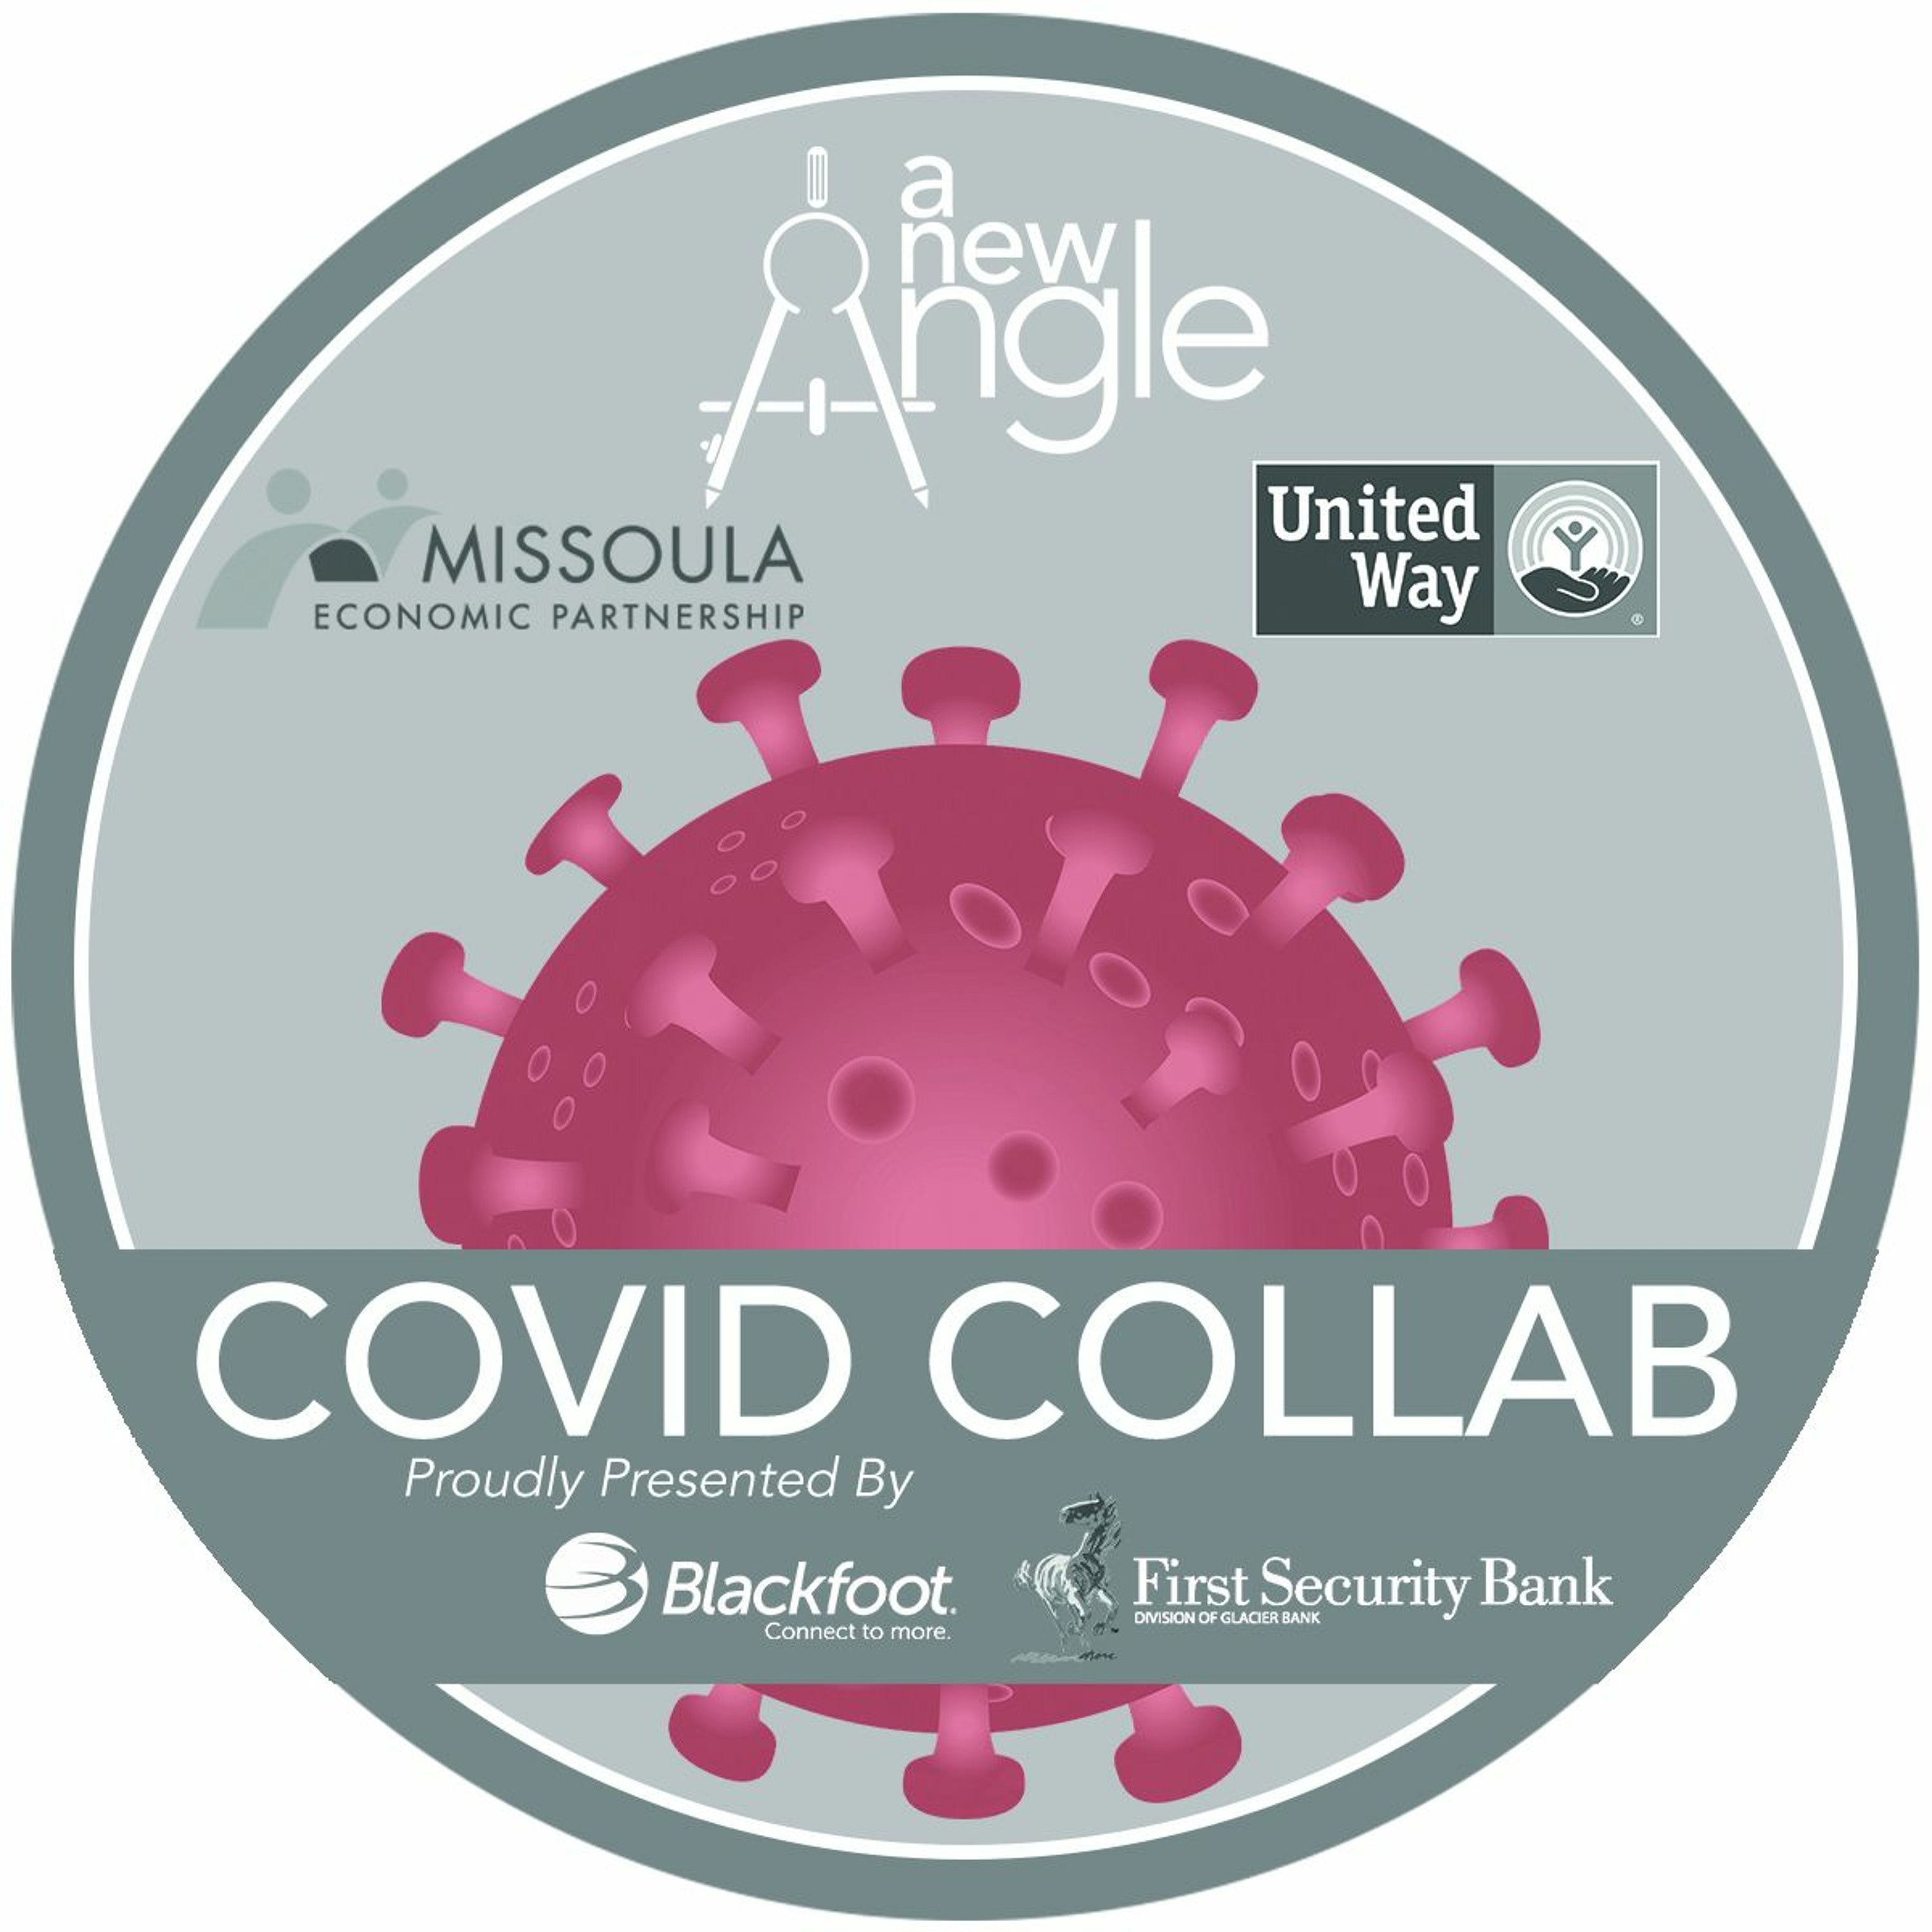 Covid Collab #4 with Scott Burke, Justin Bruce & Mike Braun